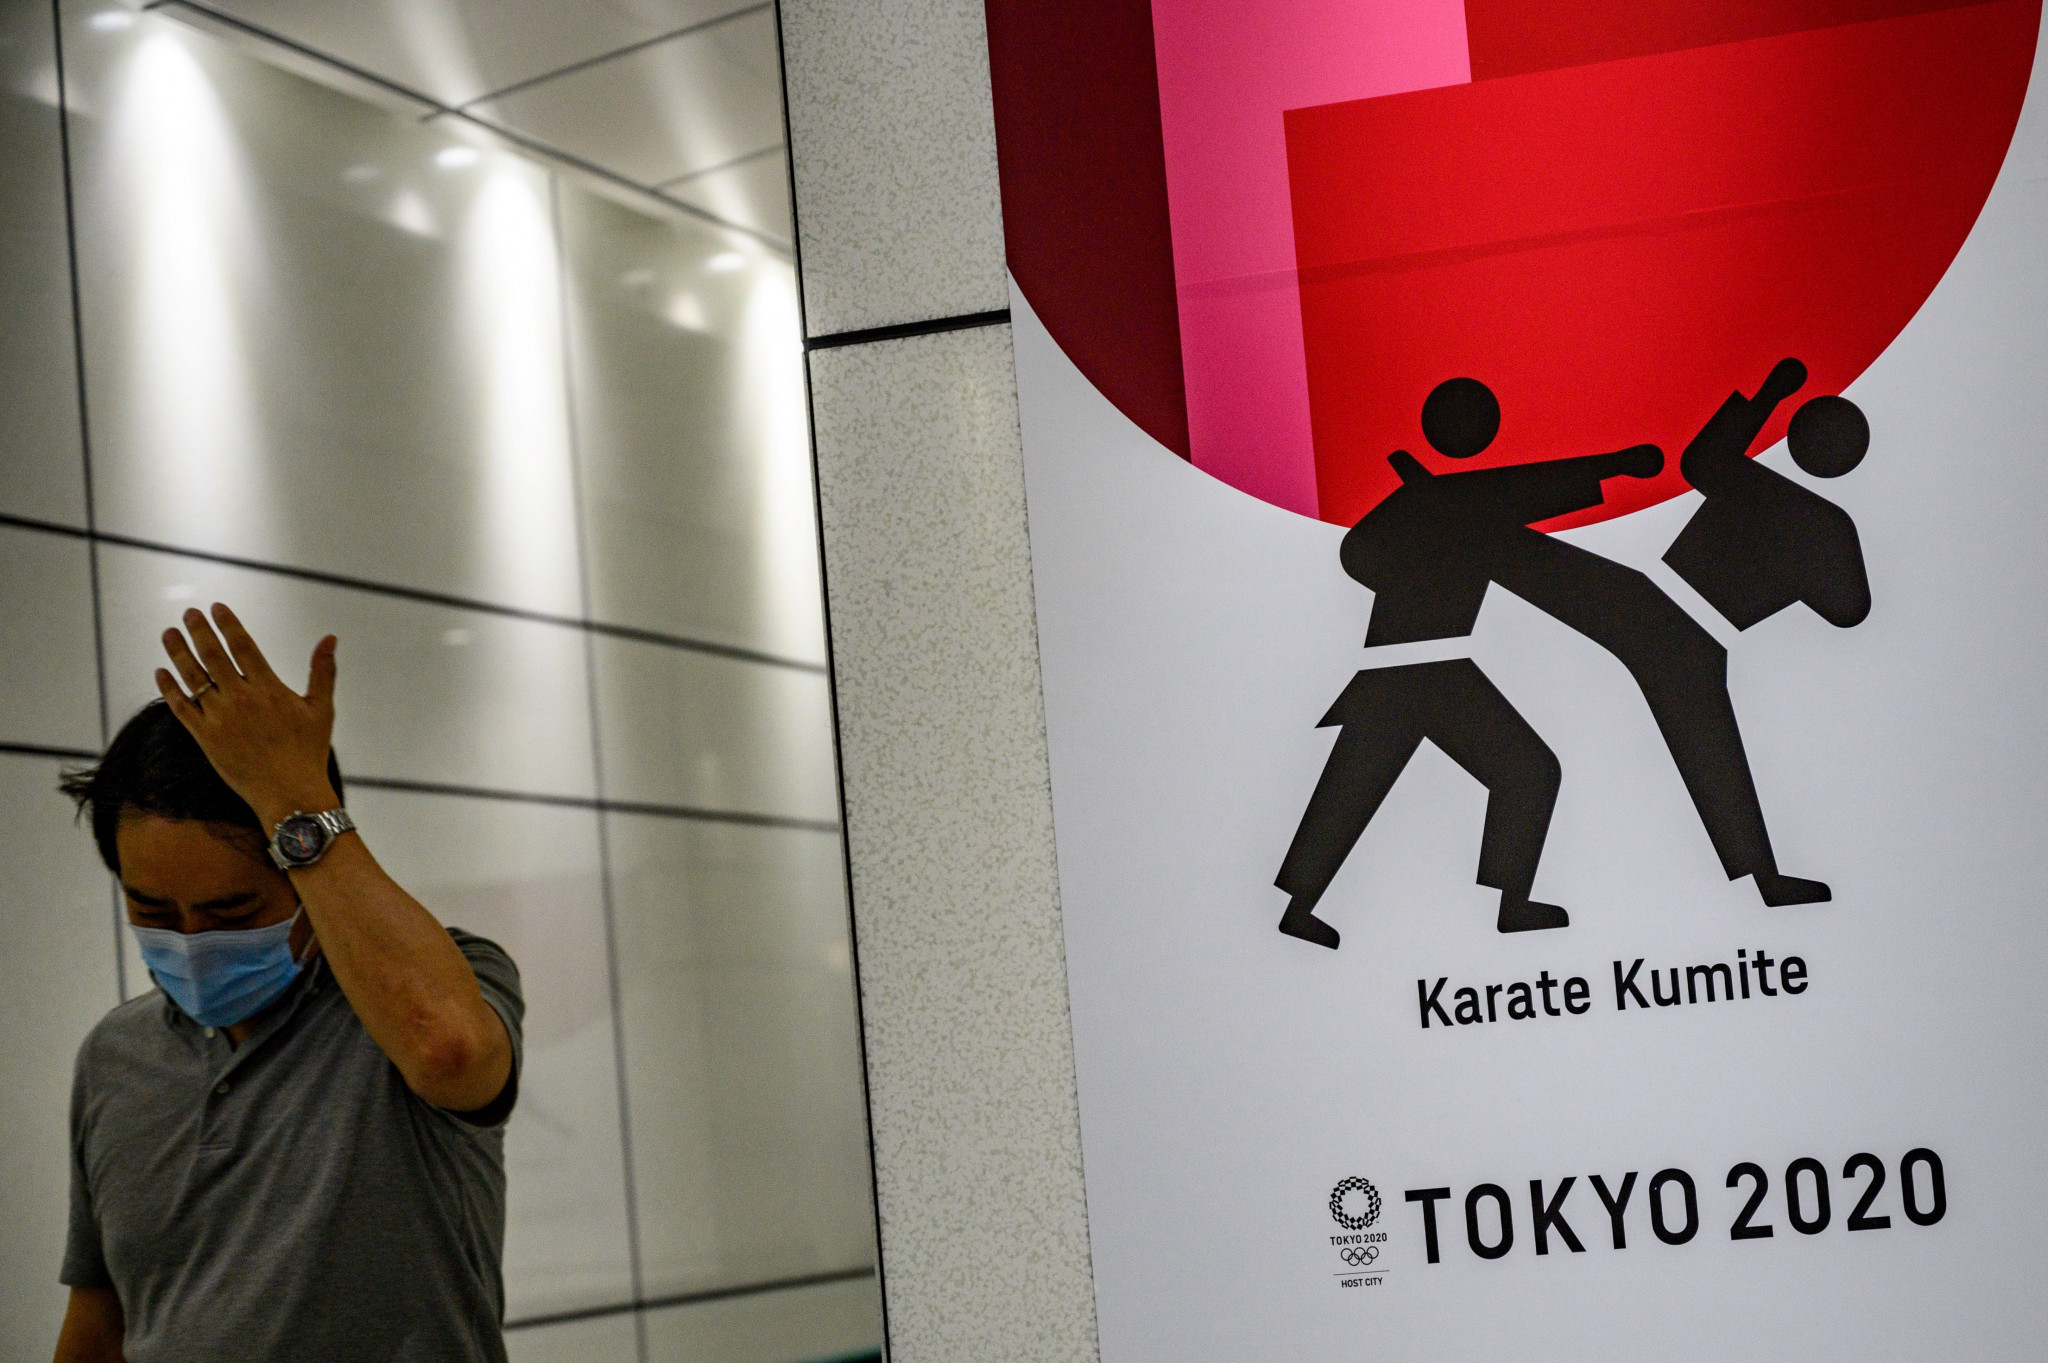 Karate will make its Olympic debut at Tokyo 2020 tomorrow ©Getty Images